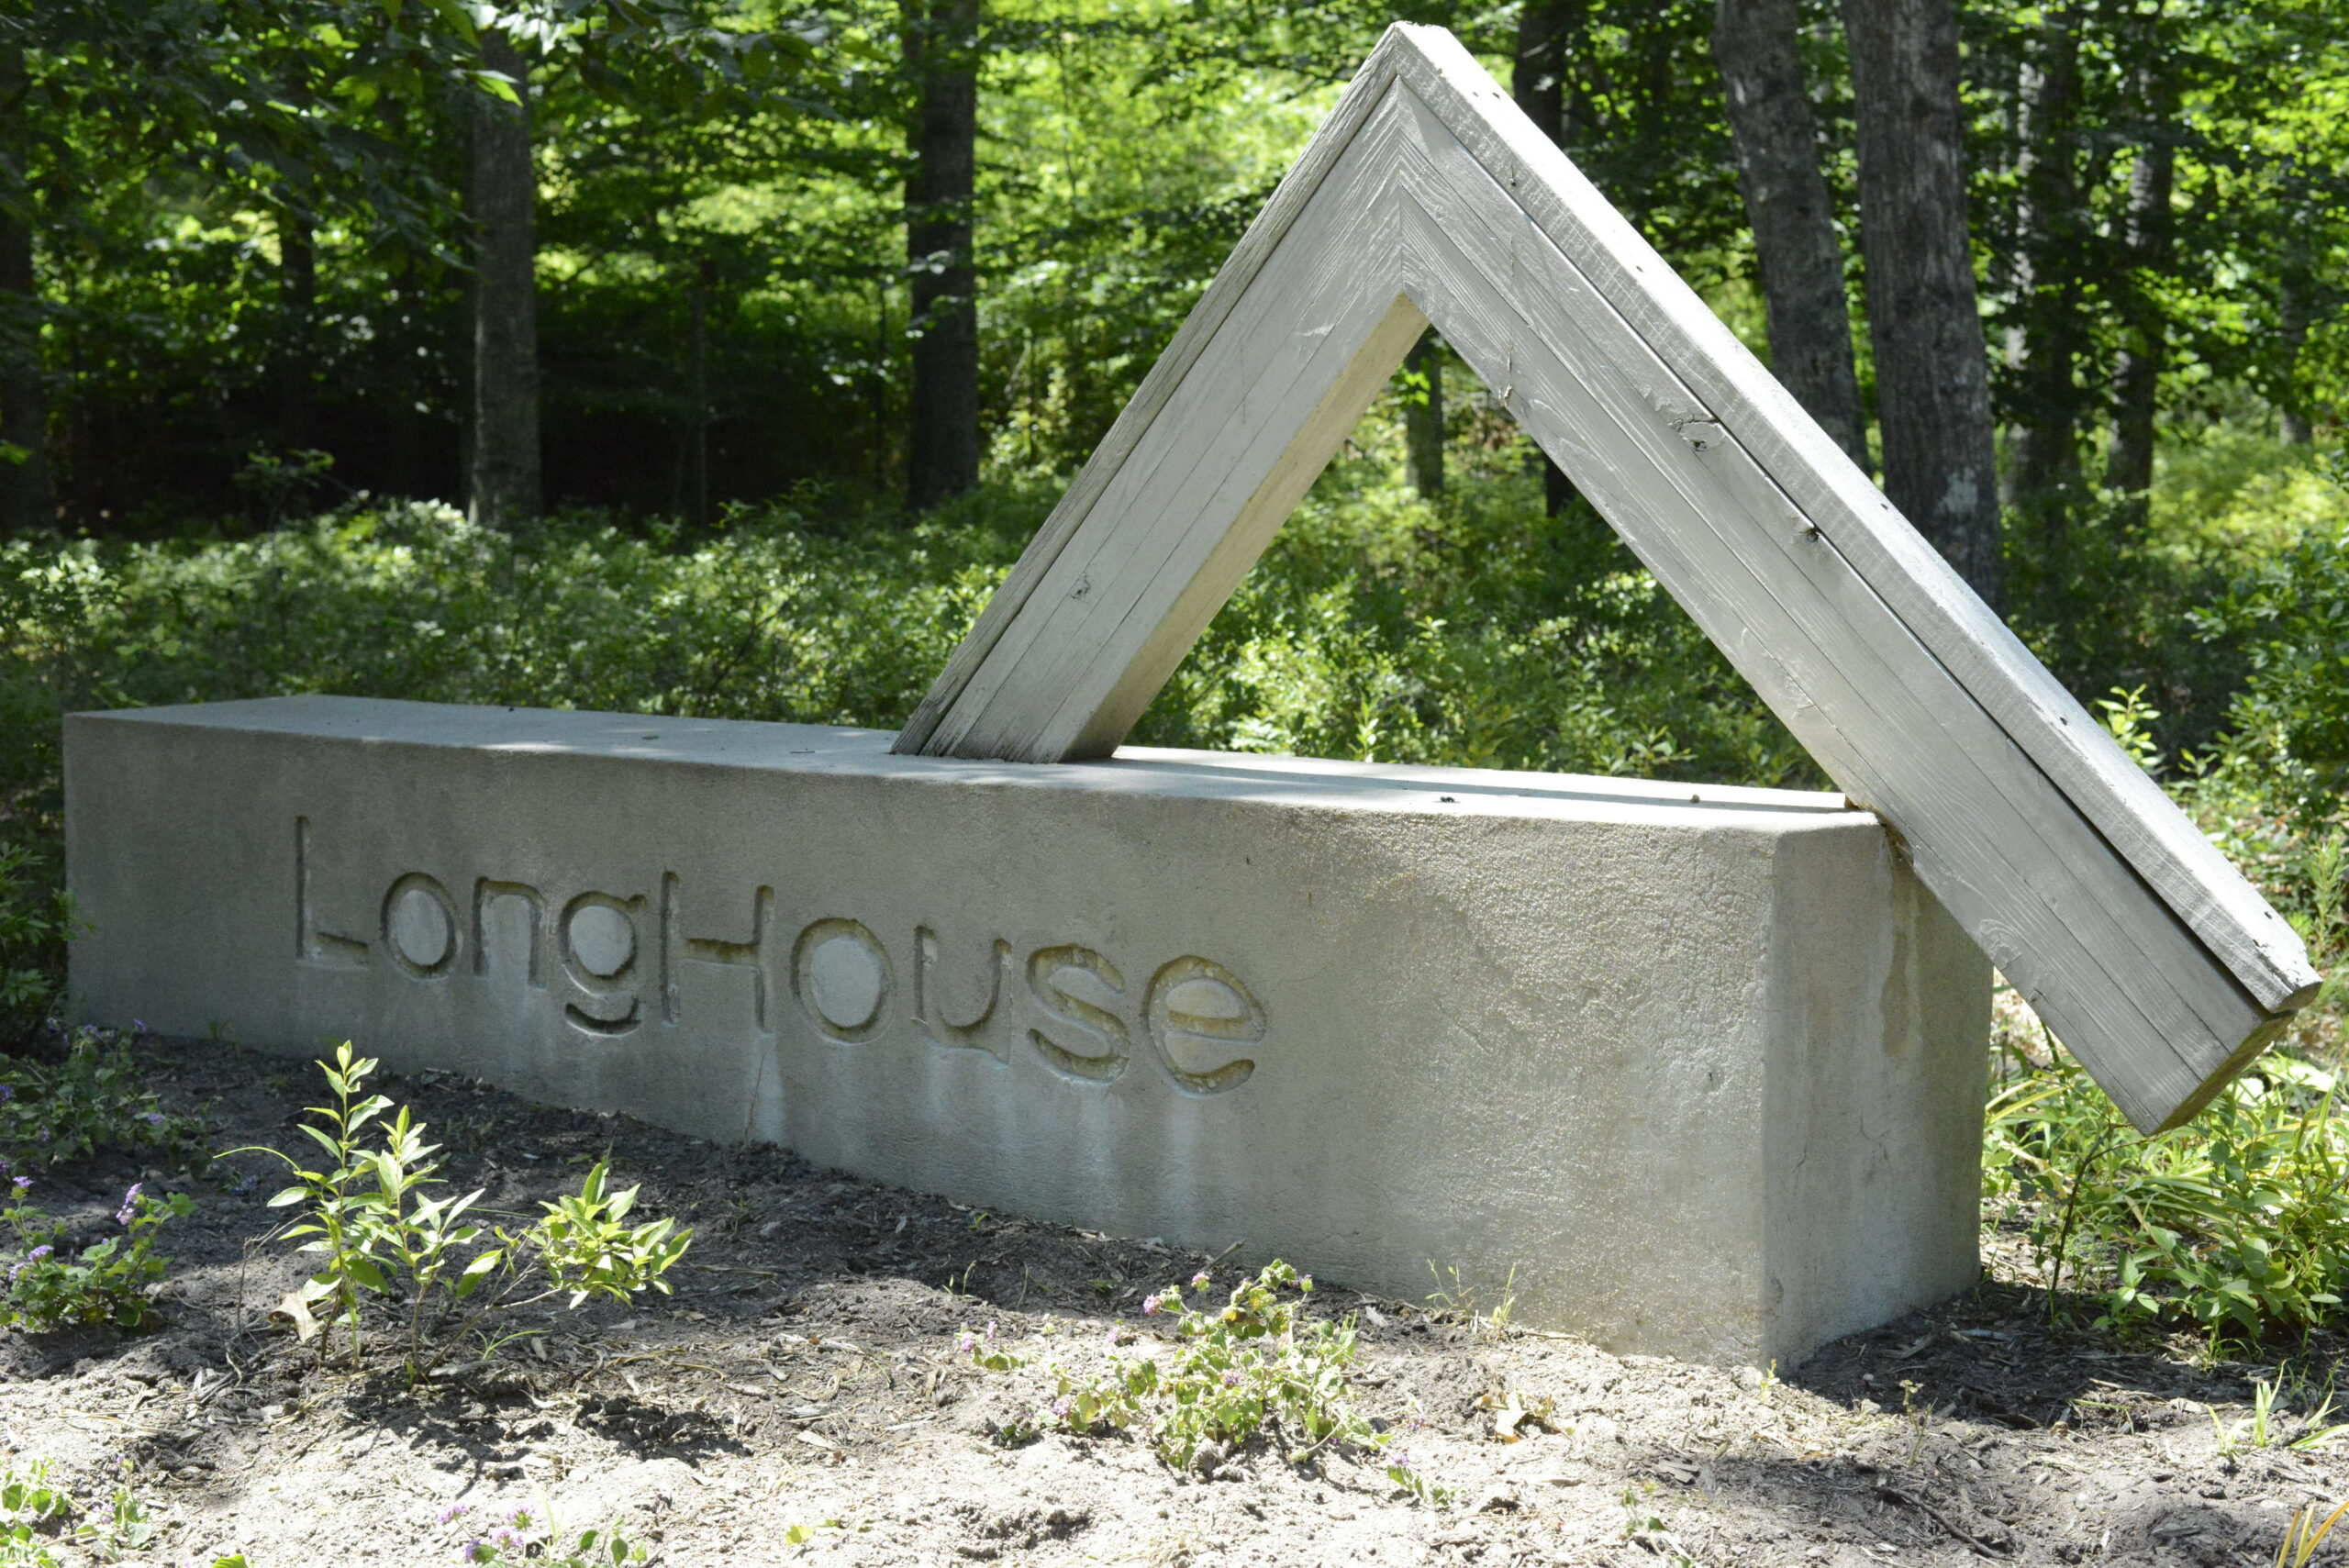 Longhouse Reserve in East Hampton is one of the artists sites mentioned on the new website. JULIA HEMING